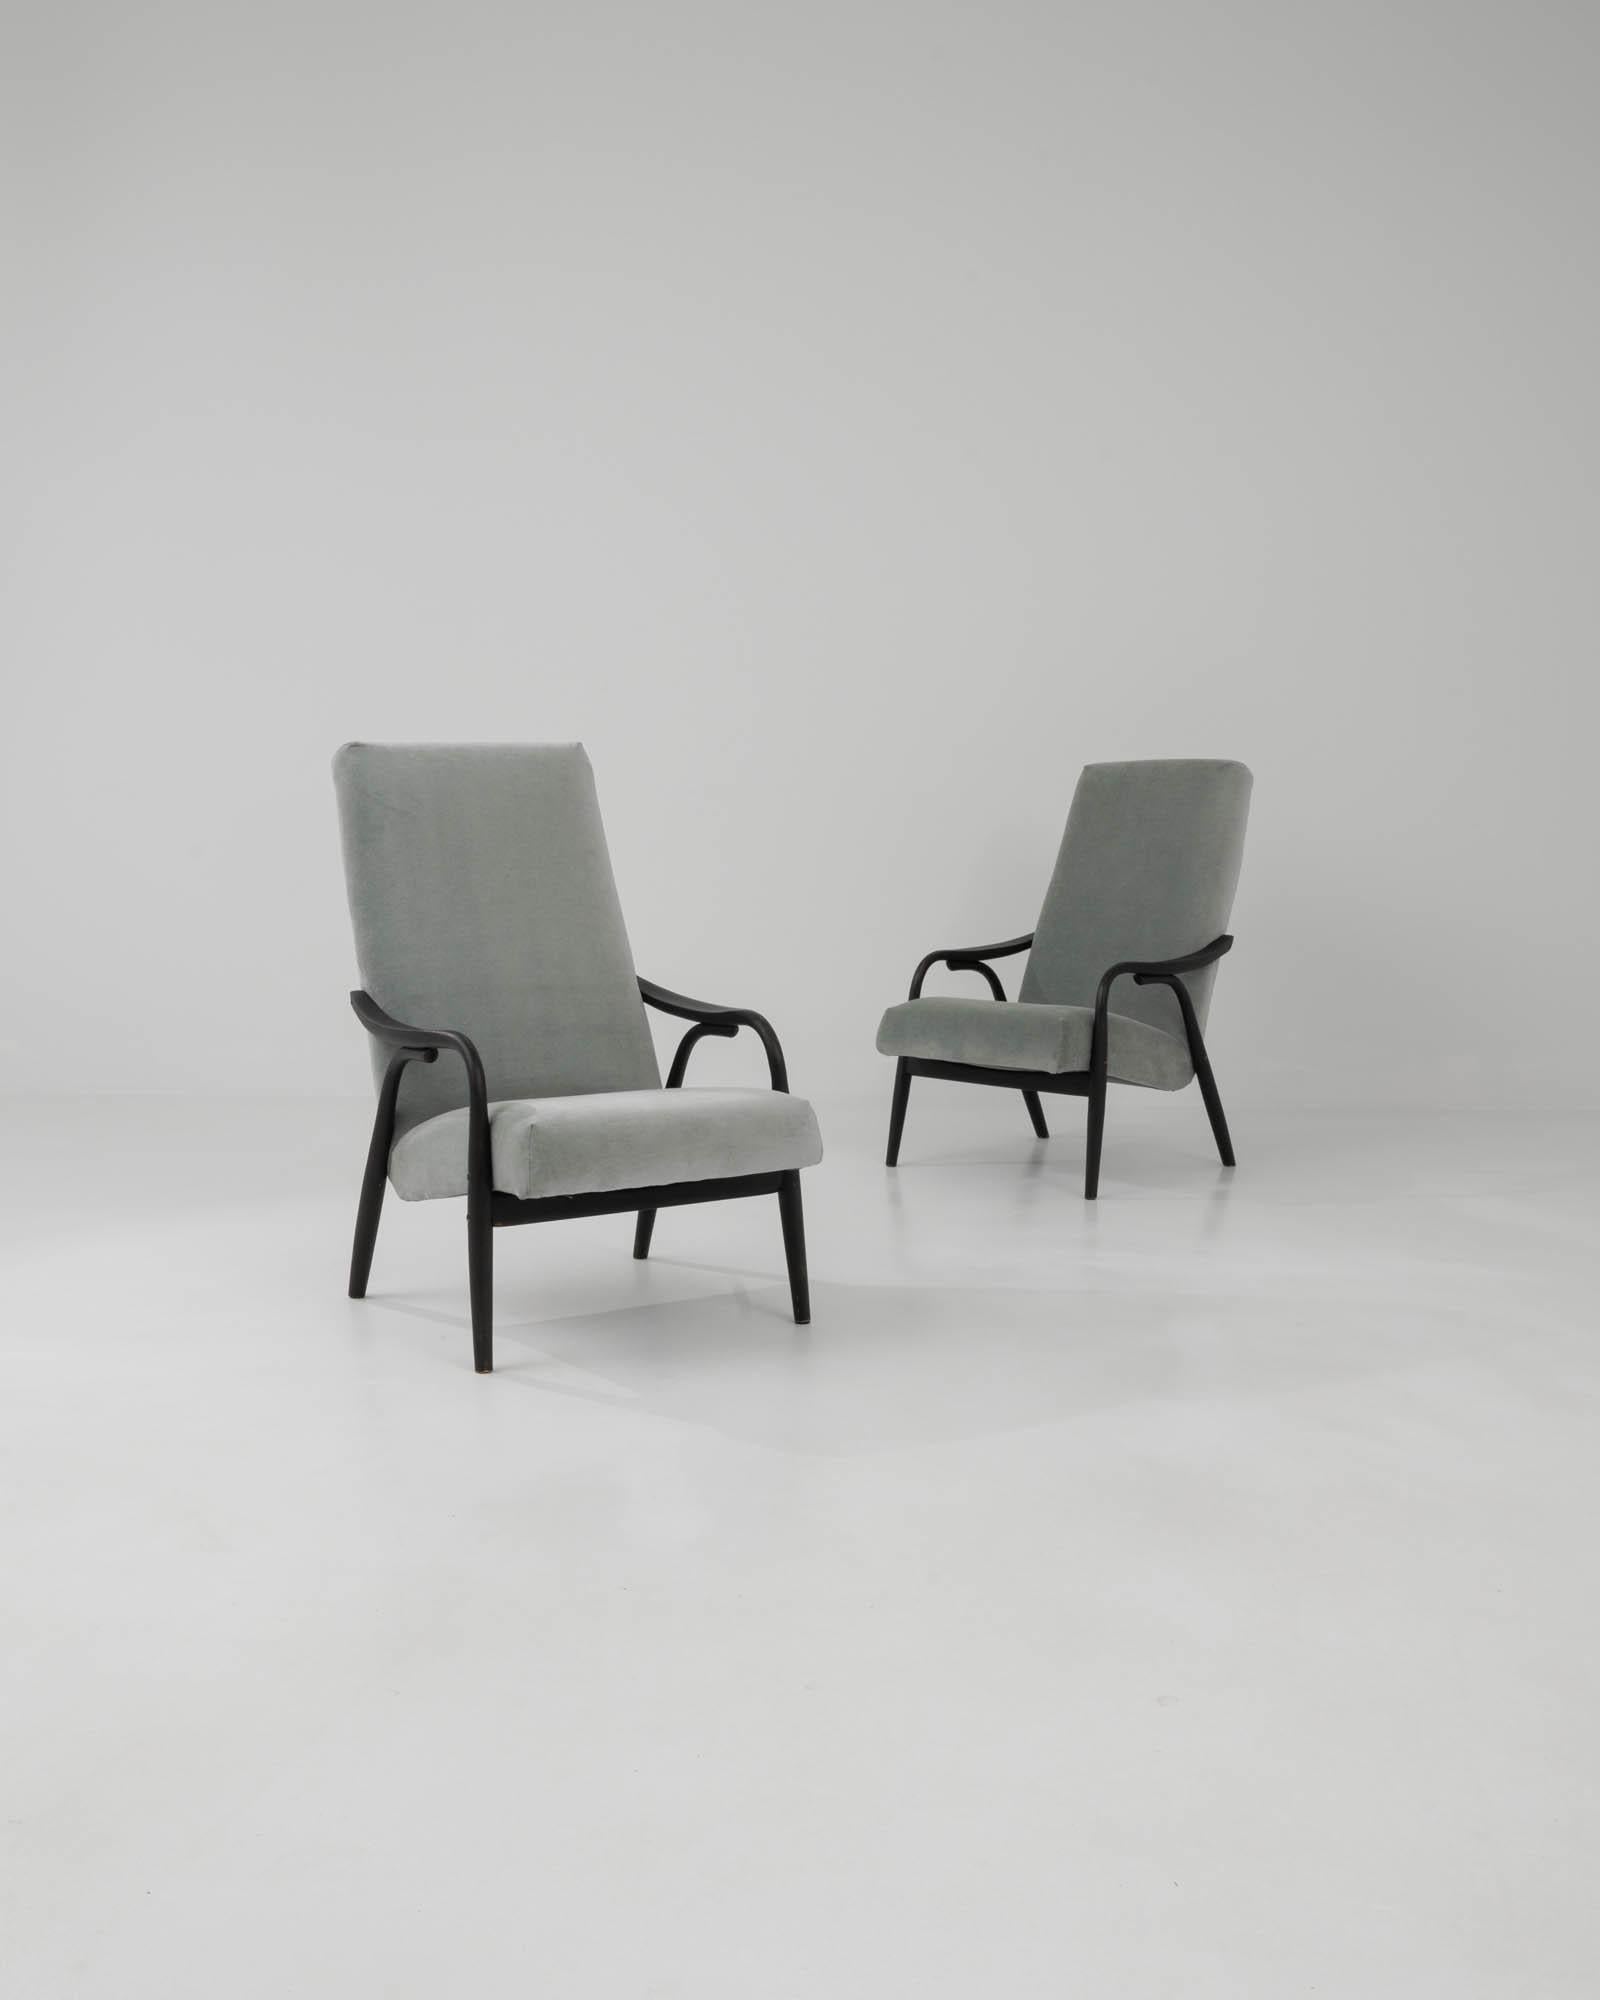 Designed in the 1960s, this pair of Czech mid-century modern armchairs is upholstered in a sophisticated smoky gray soft velvet. They feature sleek, slightly angular wood bases with a black patina, imparting a dynamic quality. The tall rectangular